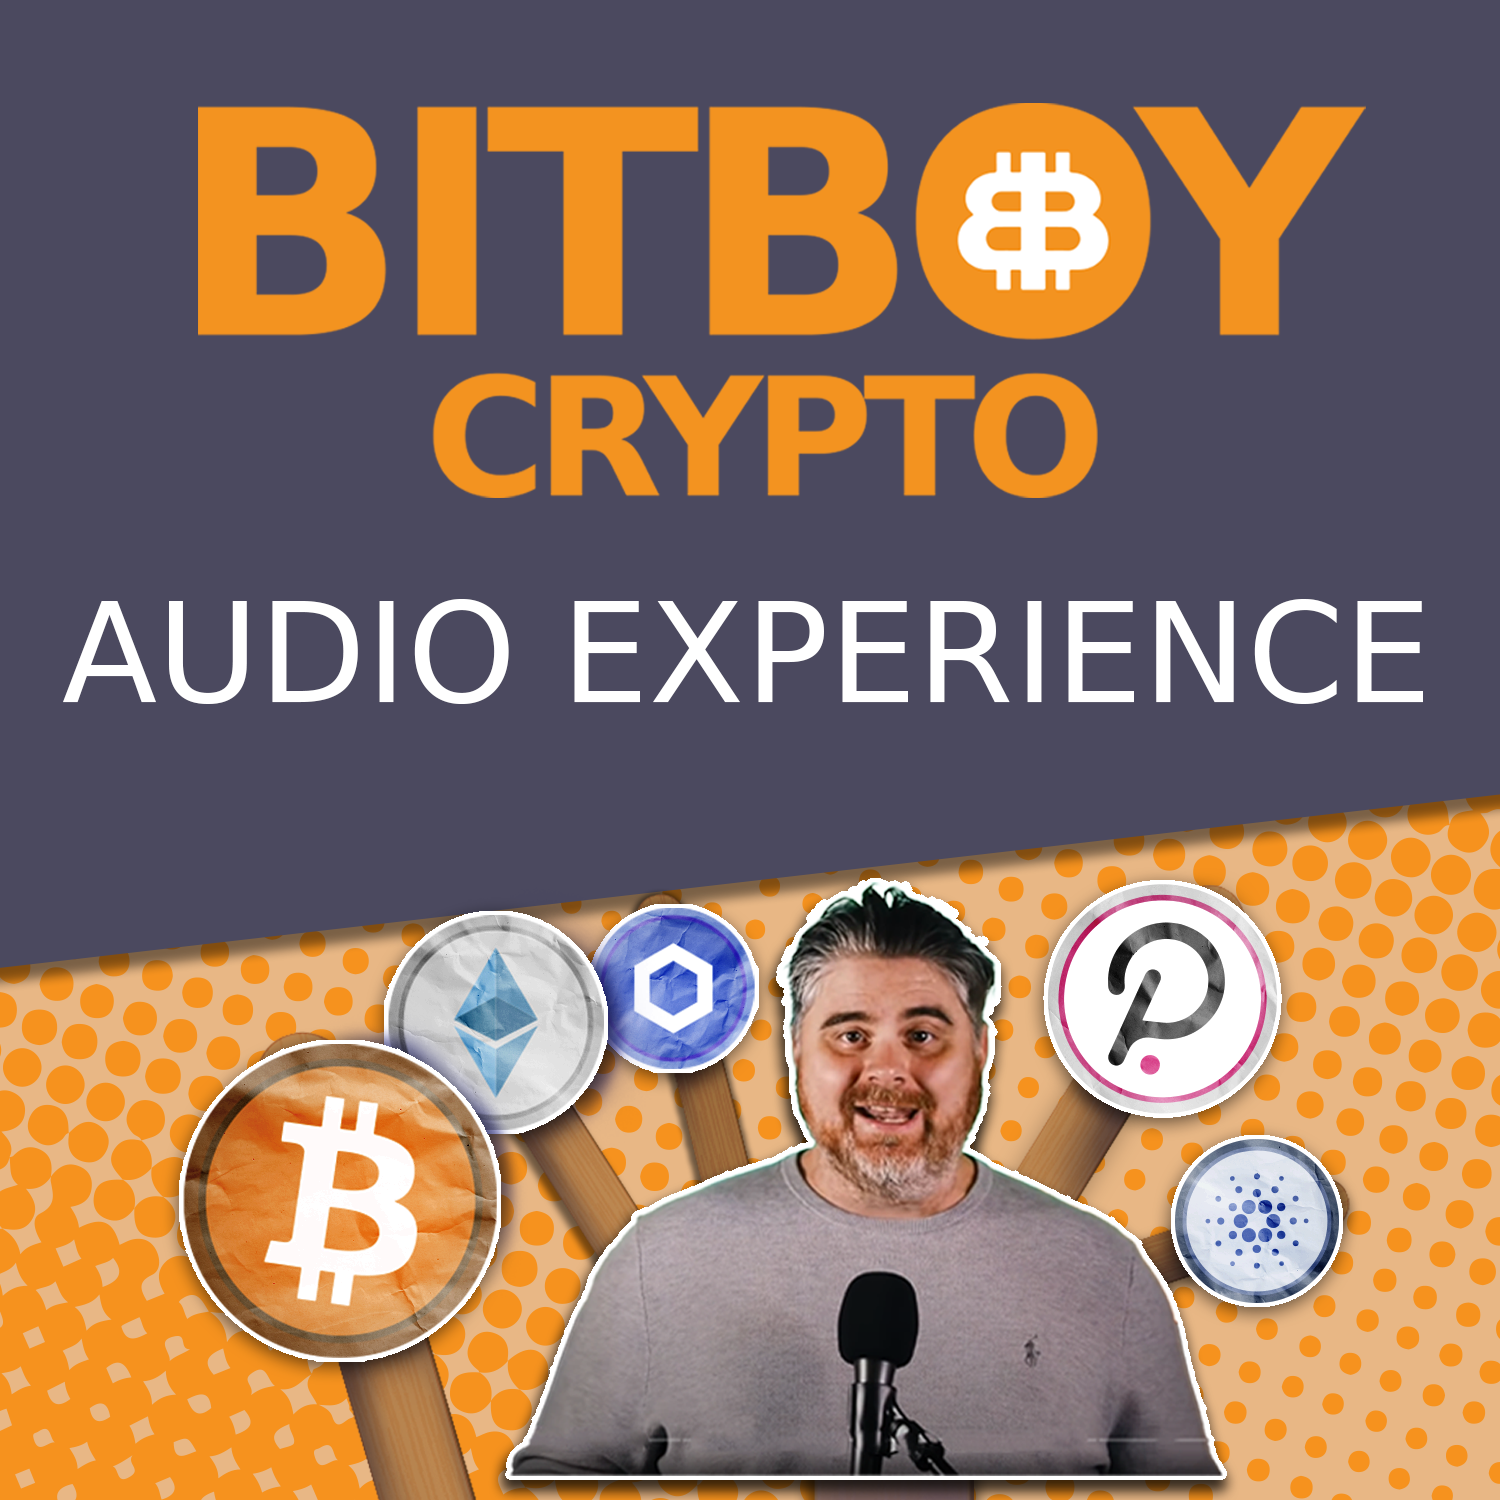 Fresh update on "five minutes" discussed on The Bitboy Crypto Podcast